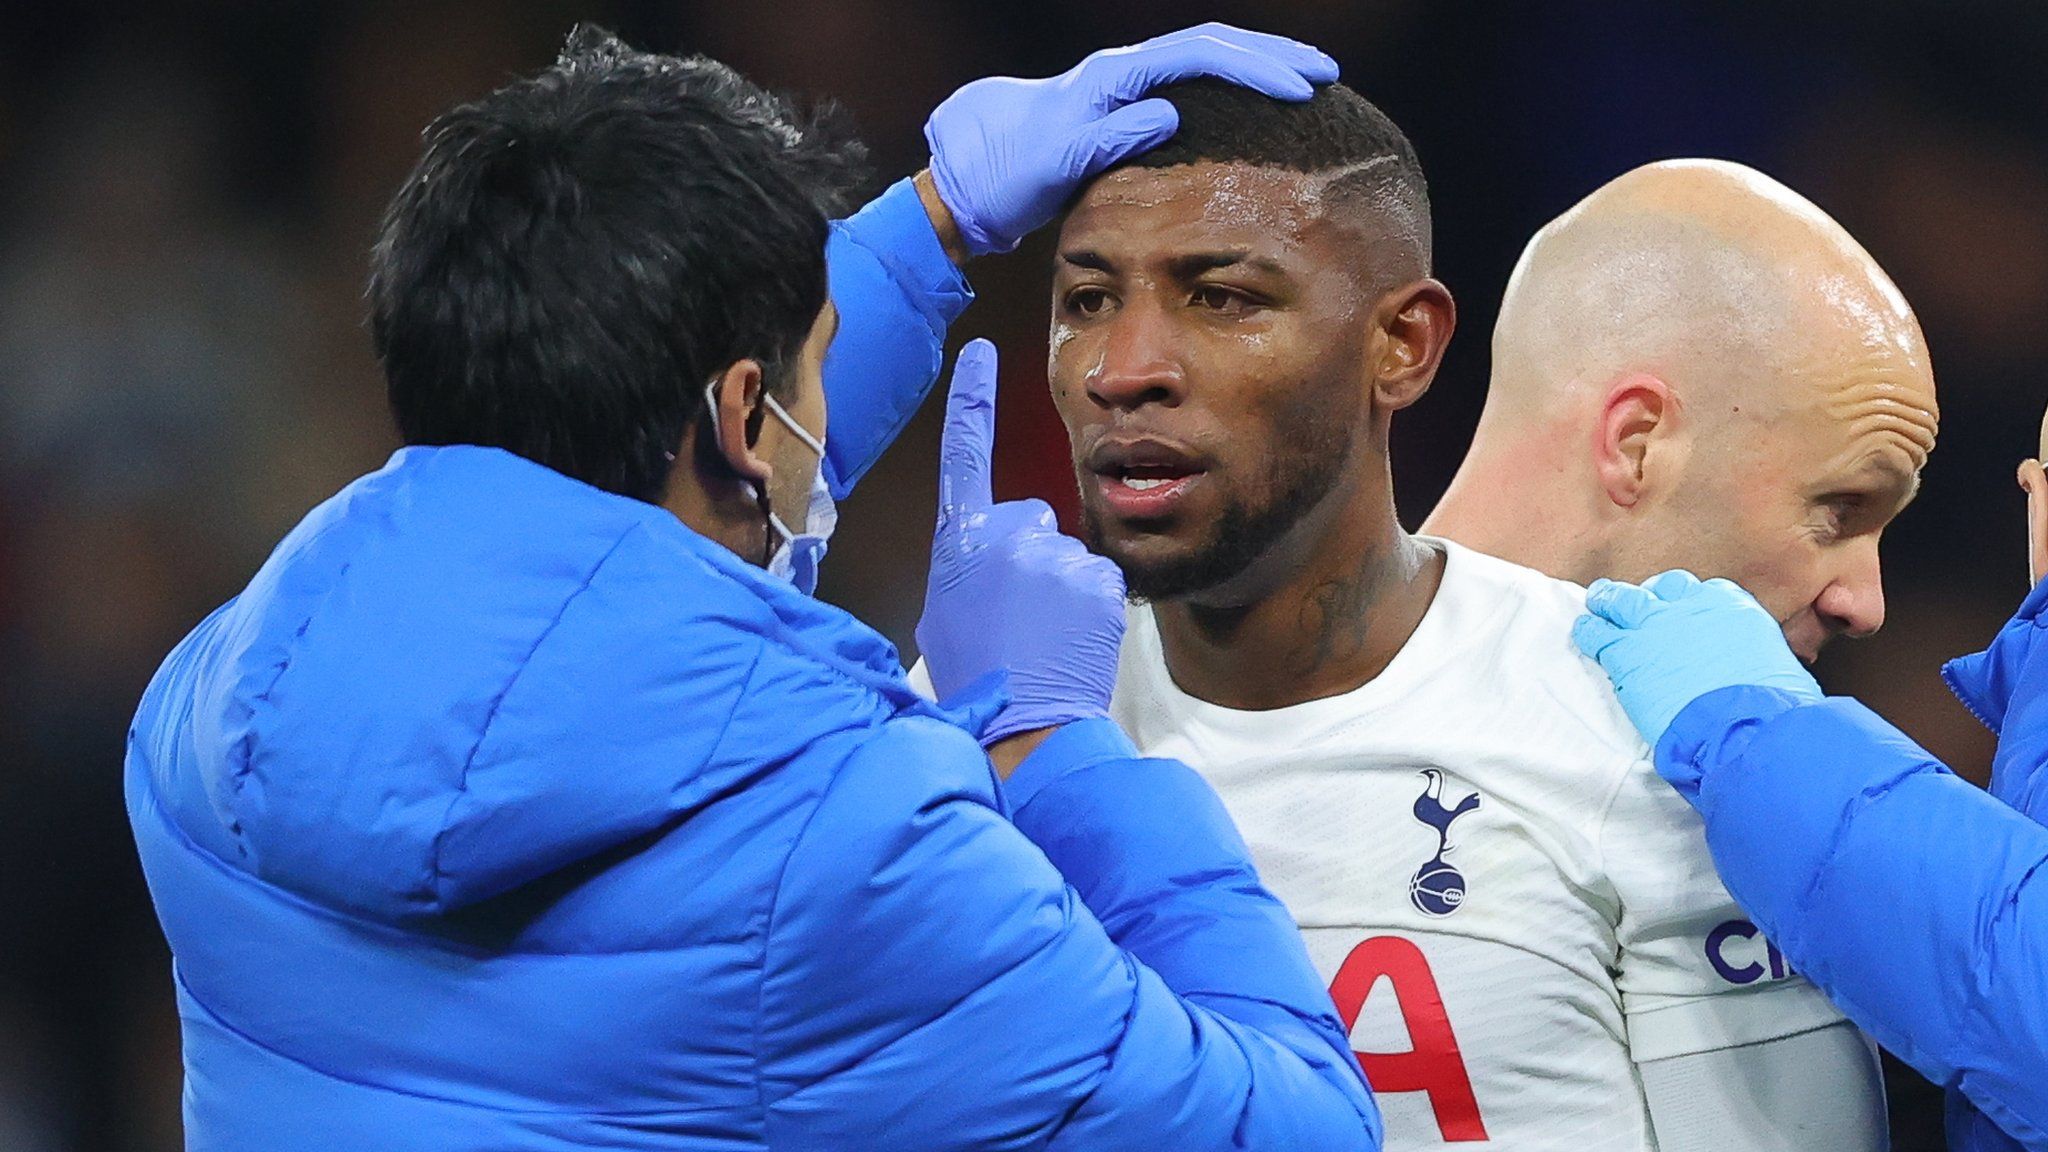 Emerson Royal of Tottenham Hotspur is checked for signs of concussion during the Premier League match between Manchester City and Tottenham Hotspur at Etihad Stadium